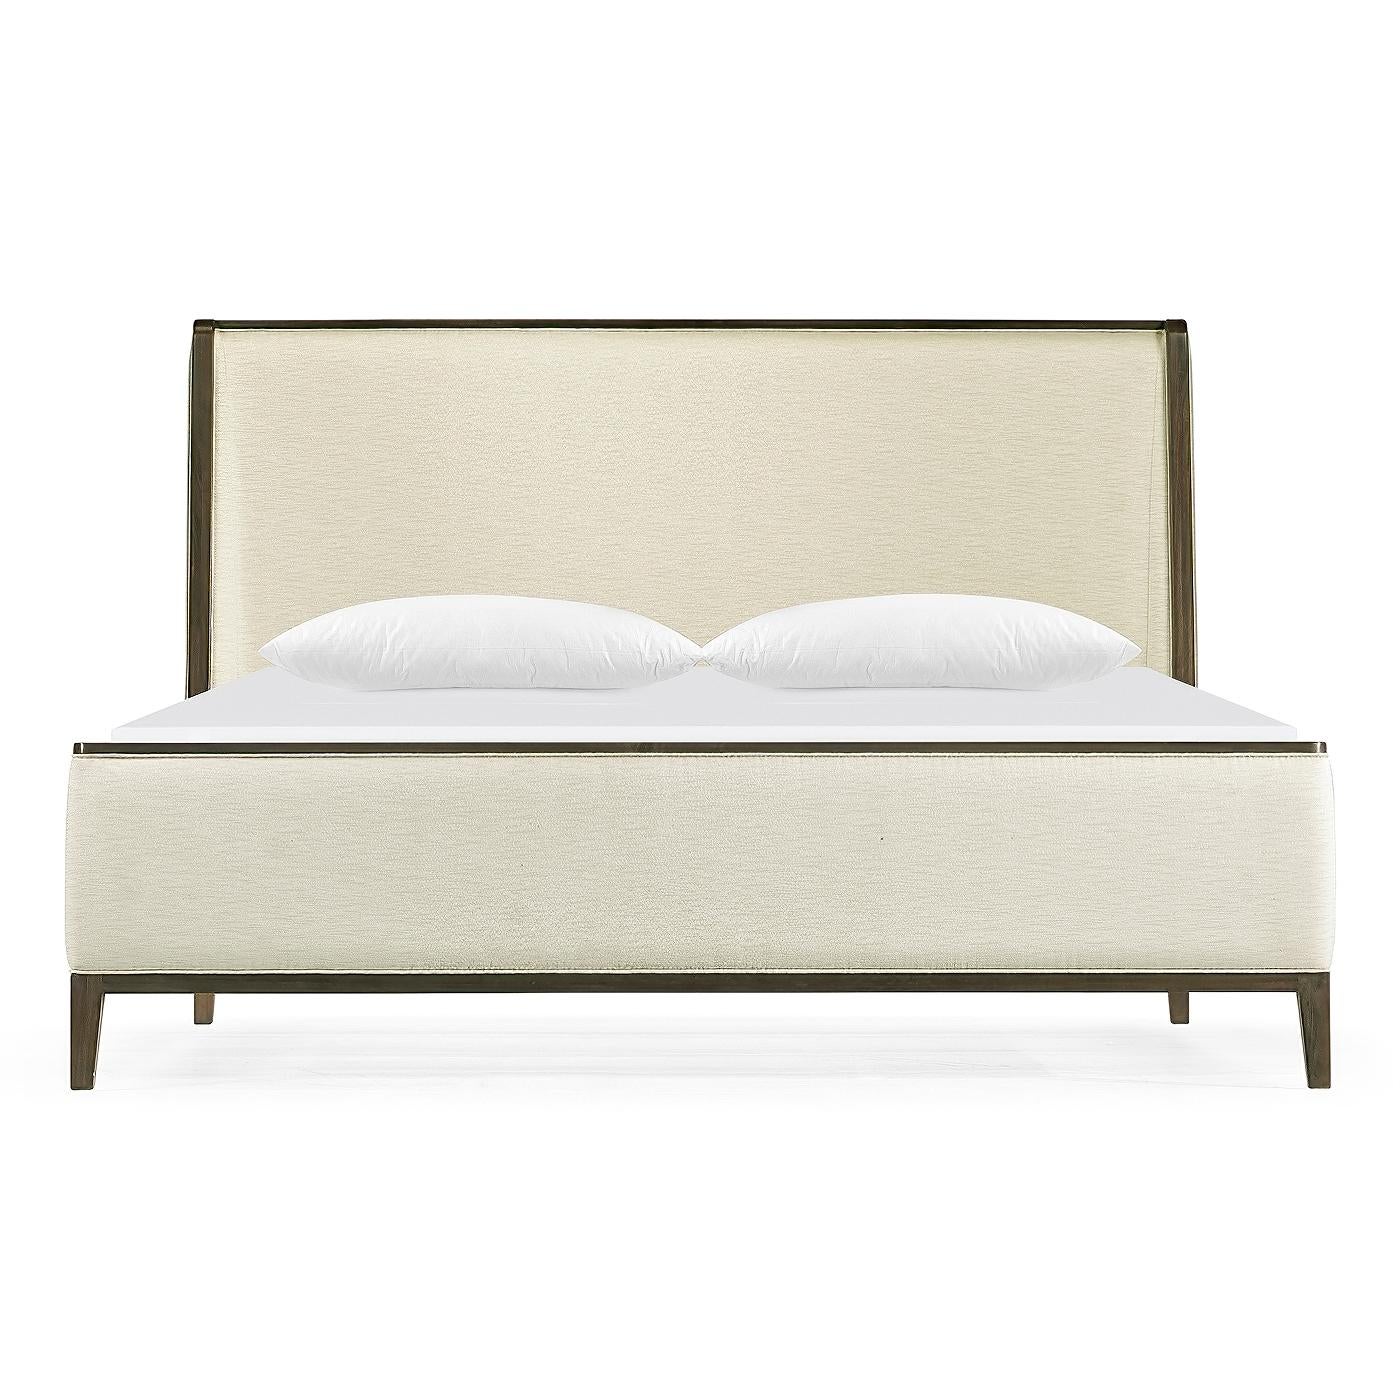 A modern upholstered king size bed with a greyed acacia frame, a winged back headboard, and raised on out flaring square tapered legs.

Dimensions: 65.33